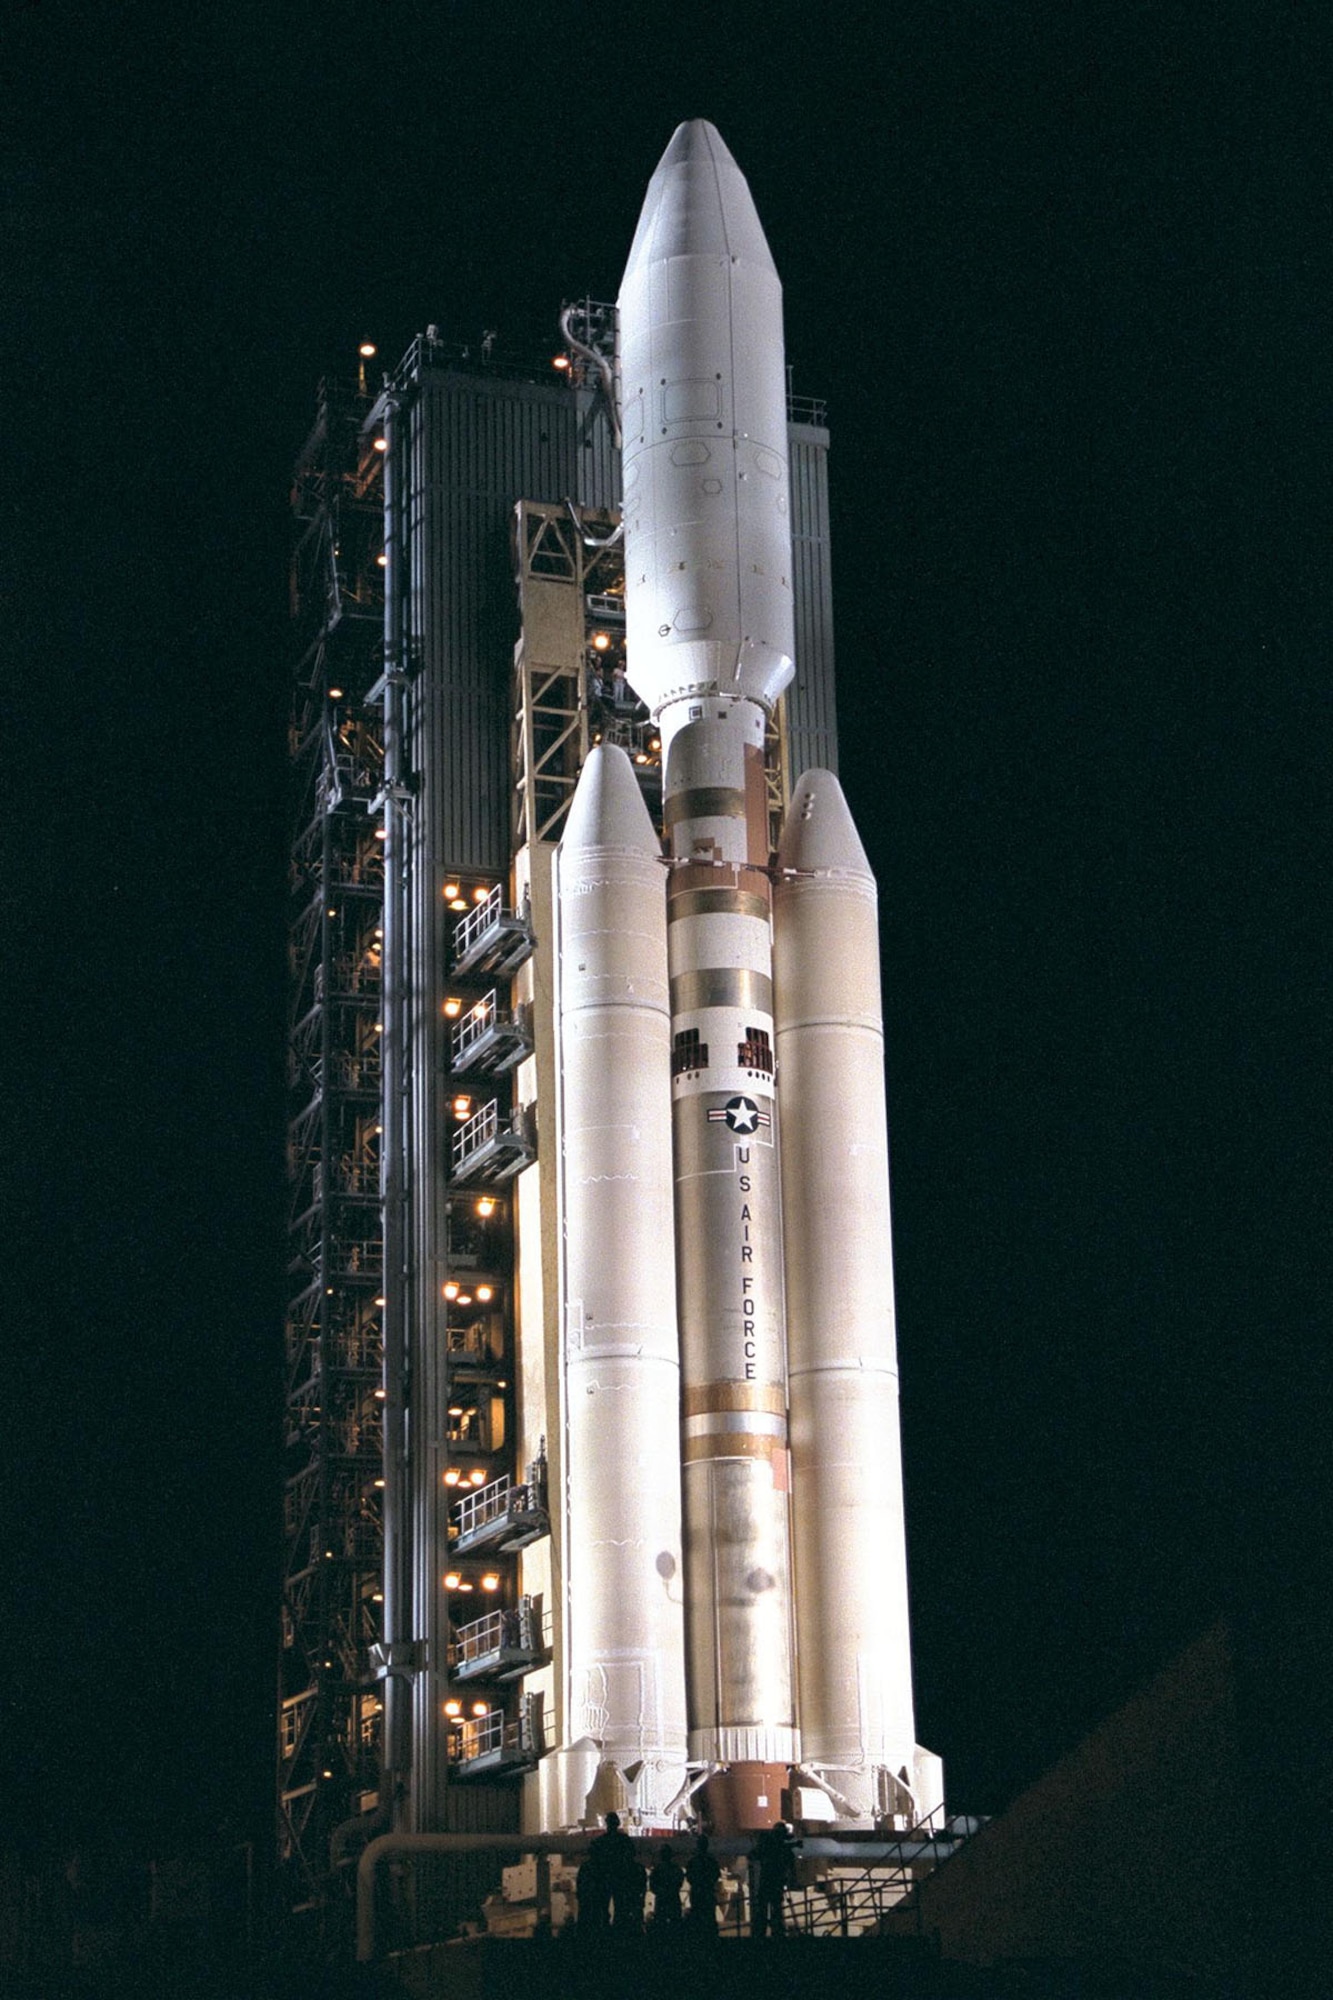 A Titan IVB  rocket at Cape Canaveral Air Force Station's Launch Complex 40. This vehicle is similar to the NMUSAF's rocket, but has a slightly shorter payload fairing. (U.S. Air Force photo)